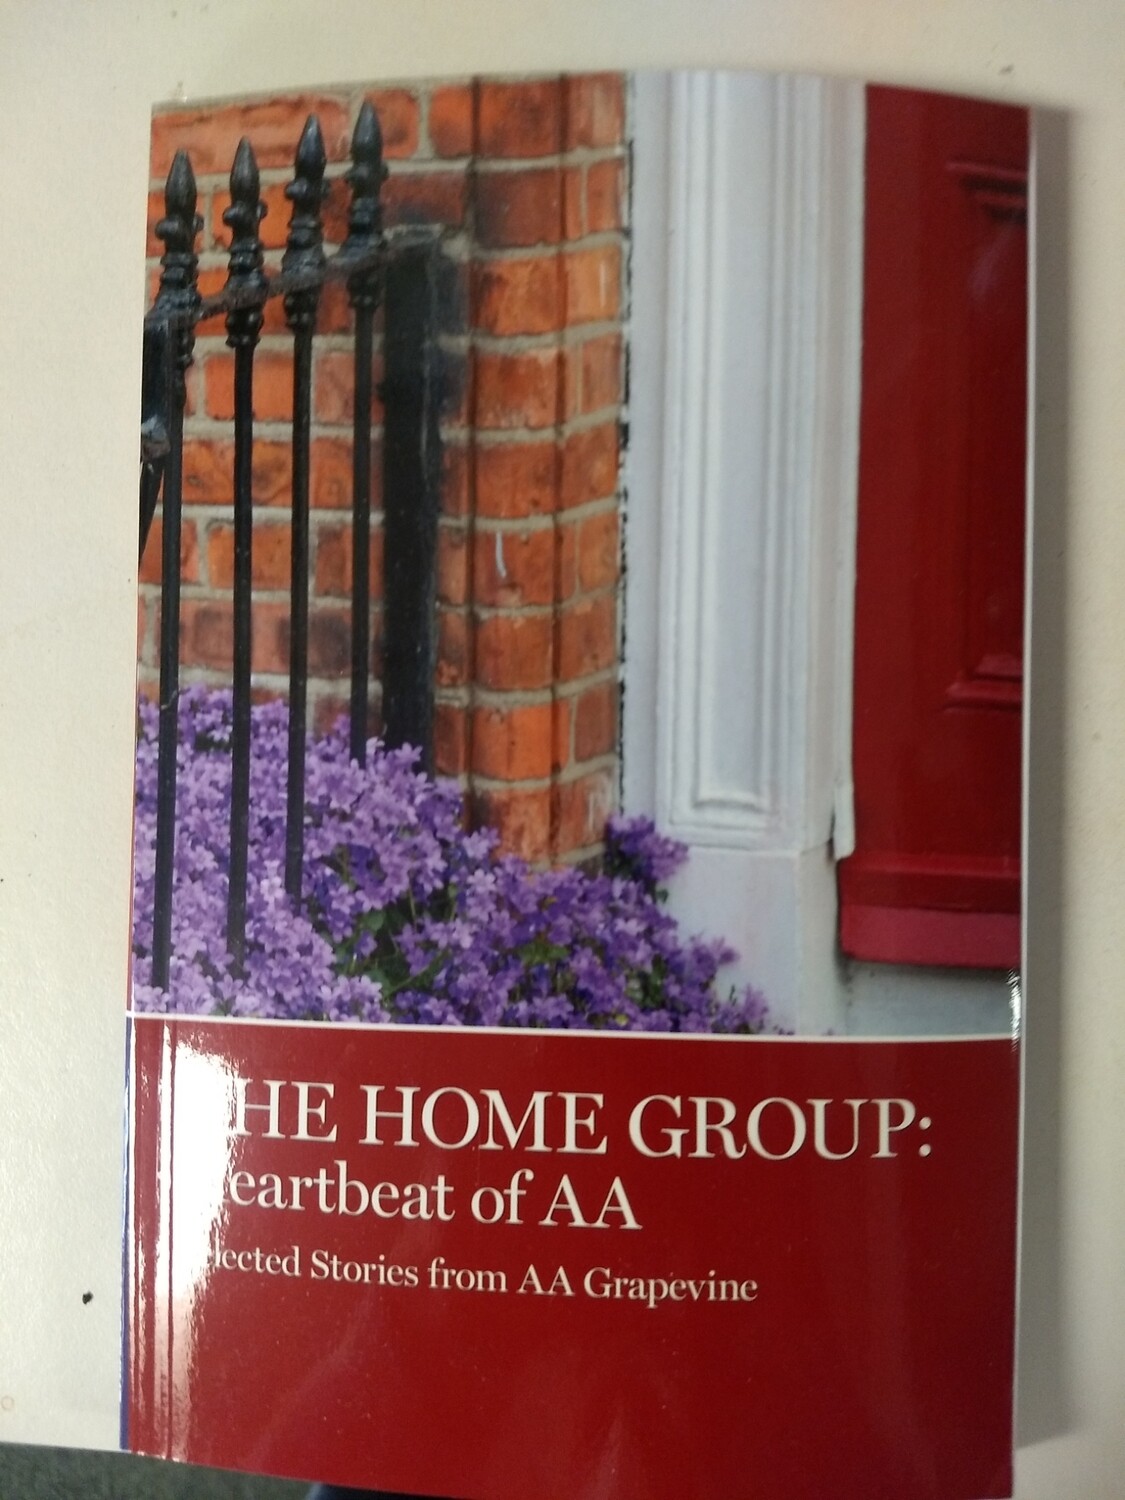 The Homegroup:Heartbeat of AA